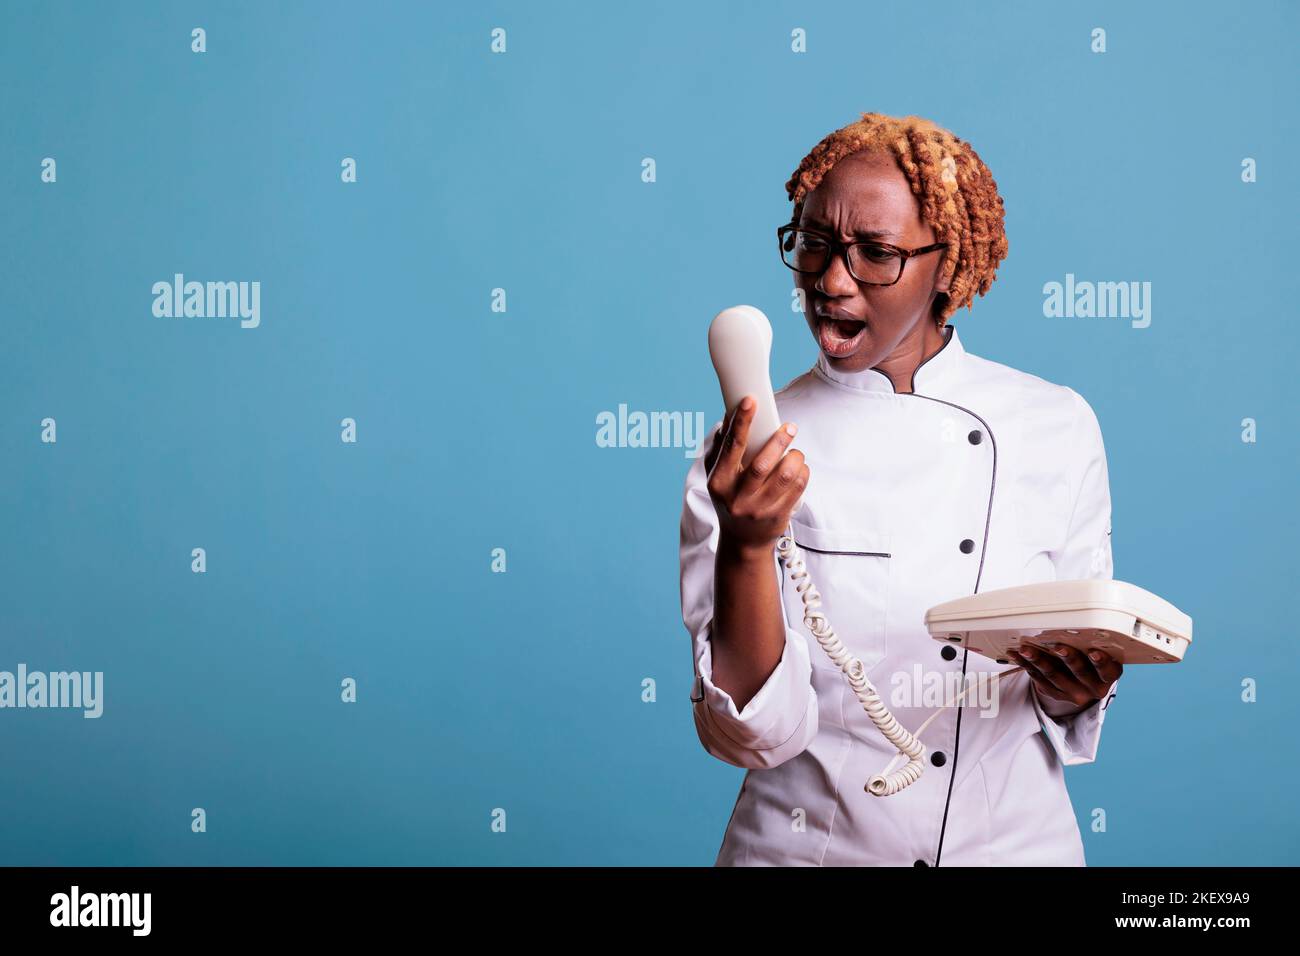 Annoying eatery woman chef yelling on landline call. Angry kitchen manager arguing on phone. African american female restaurant worker fighting loudly on audio call. Stock Photo